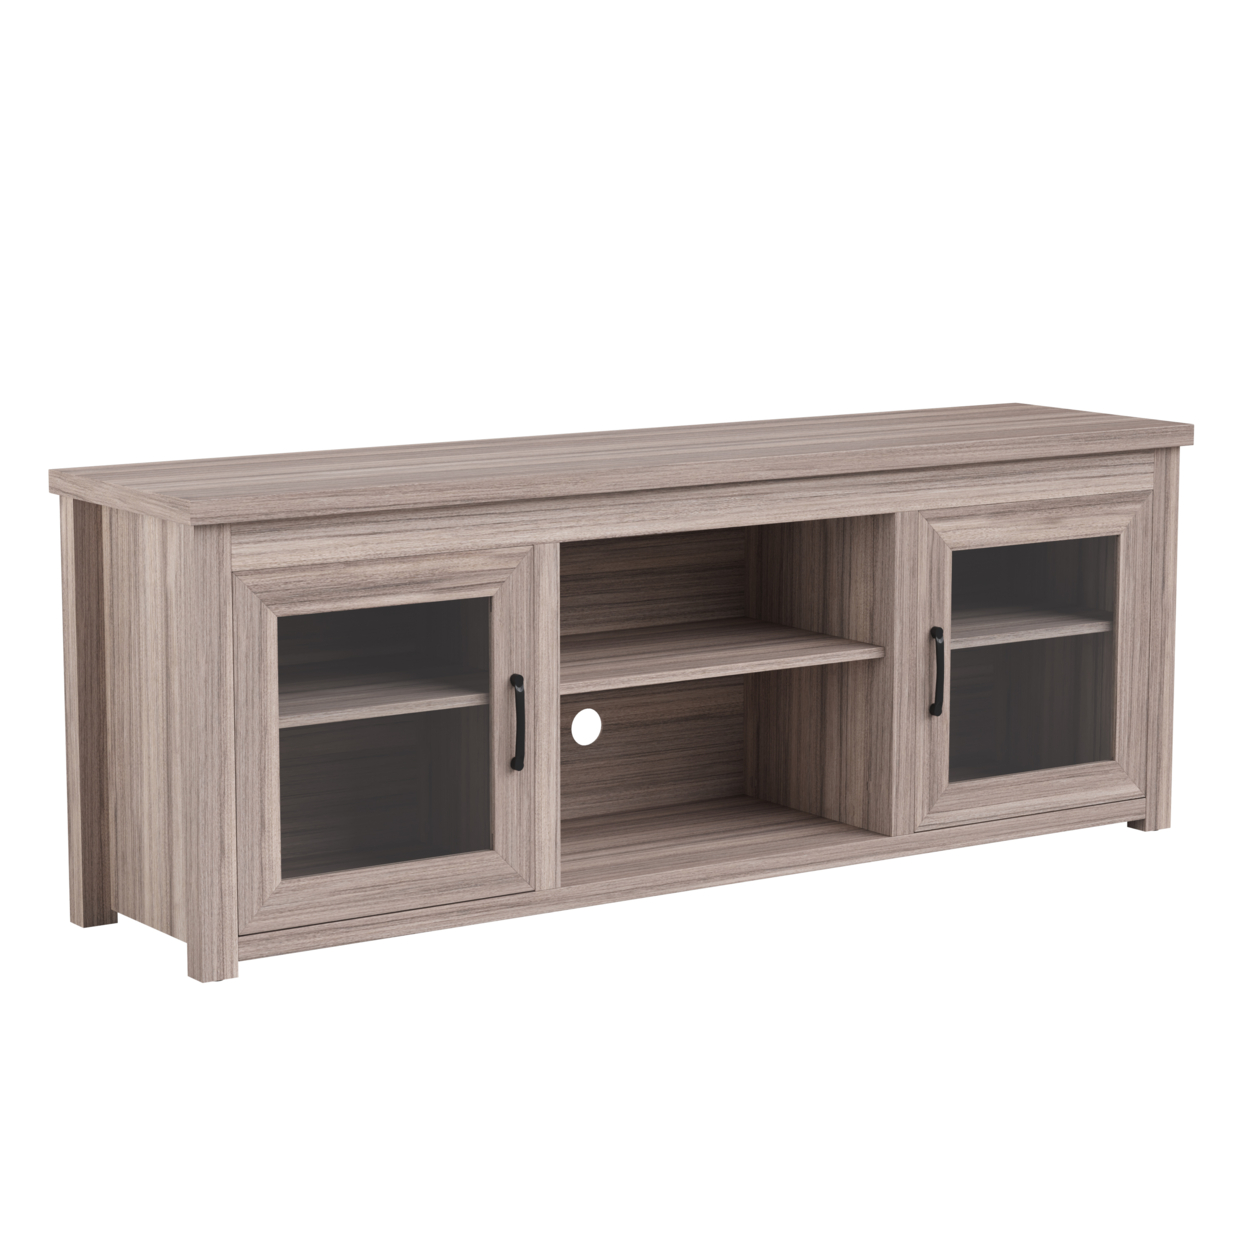 Sheffield Classic TV Stand Up To 80 TVs - Gray Wash Oak Finish With Full Glass Doors - 65 Engineered Wood Frame - 3 Shelves